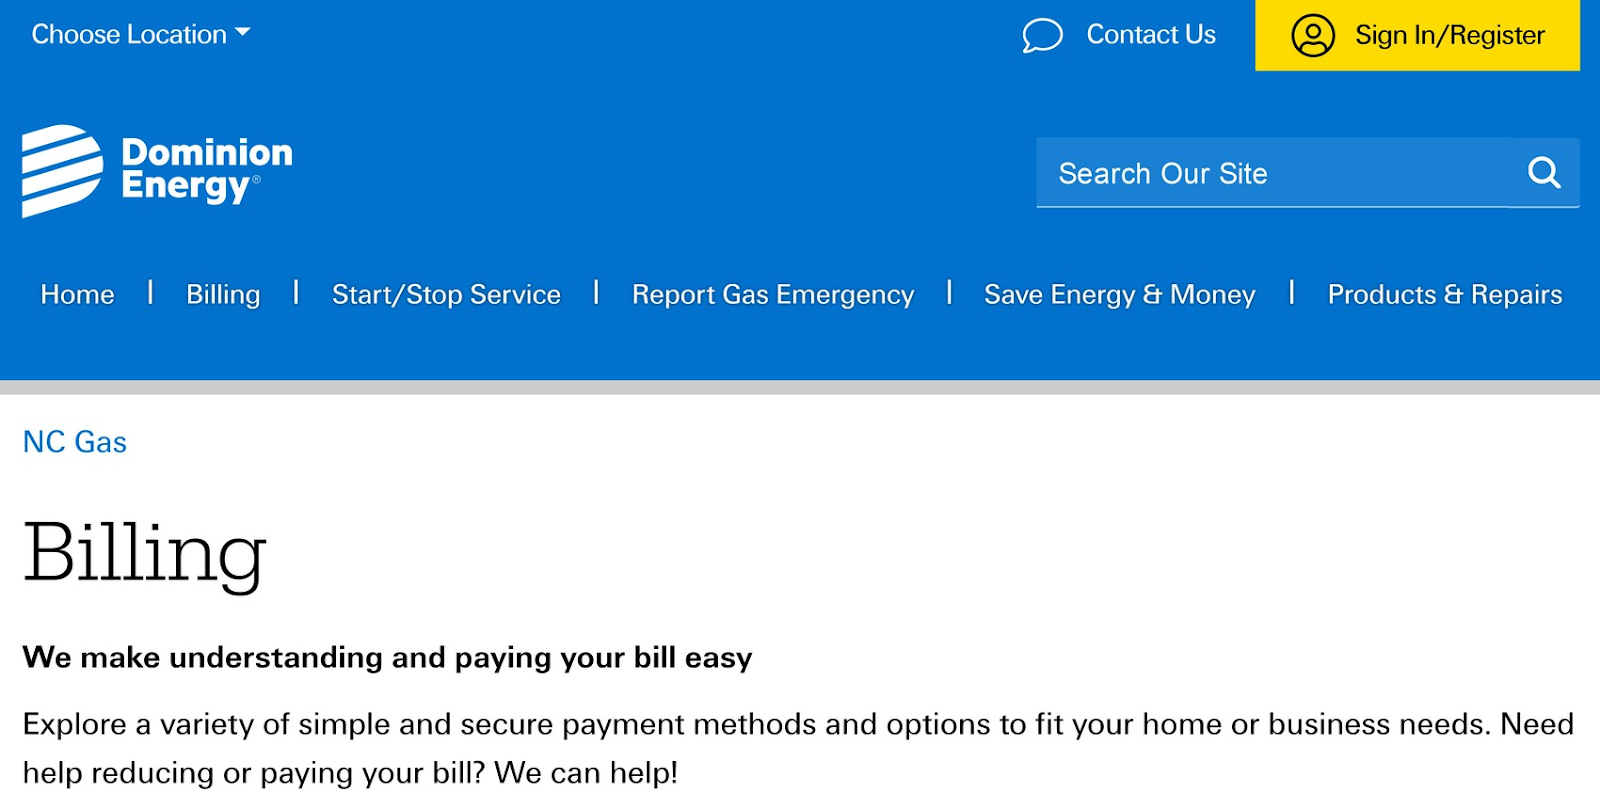 Dominion Energy "Billing" page